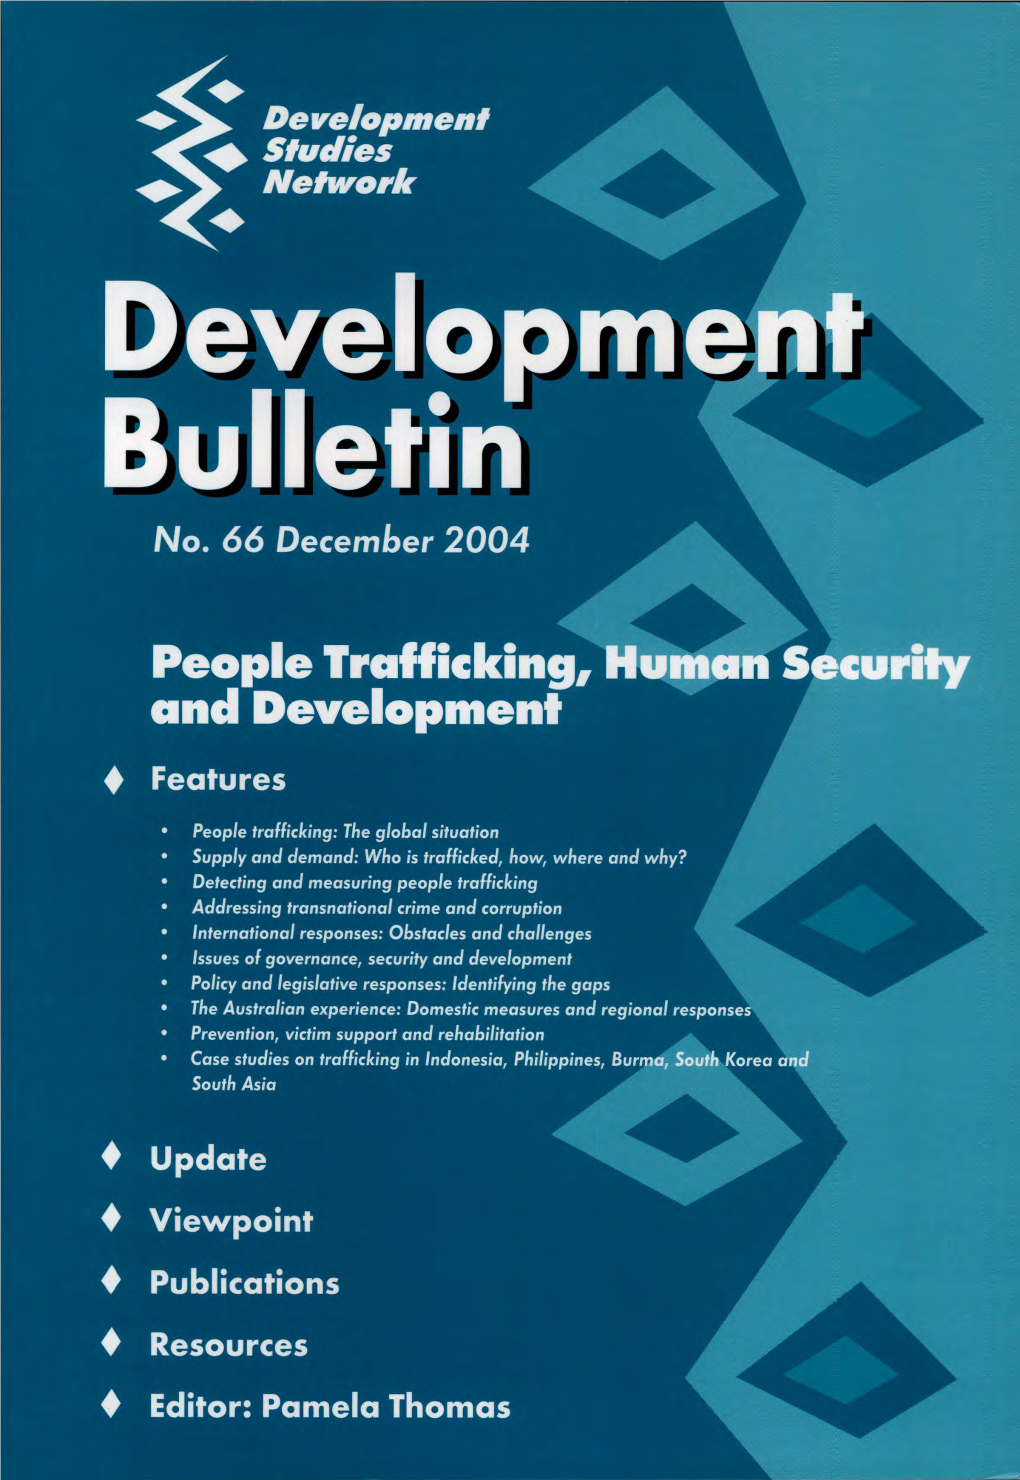 People Trafficking, Human Security and Development [PDF,10MB]